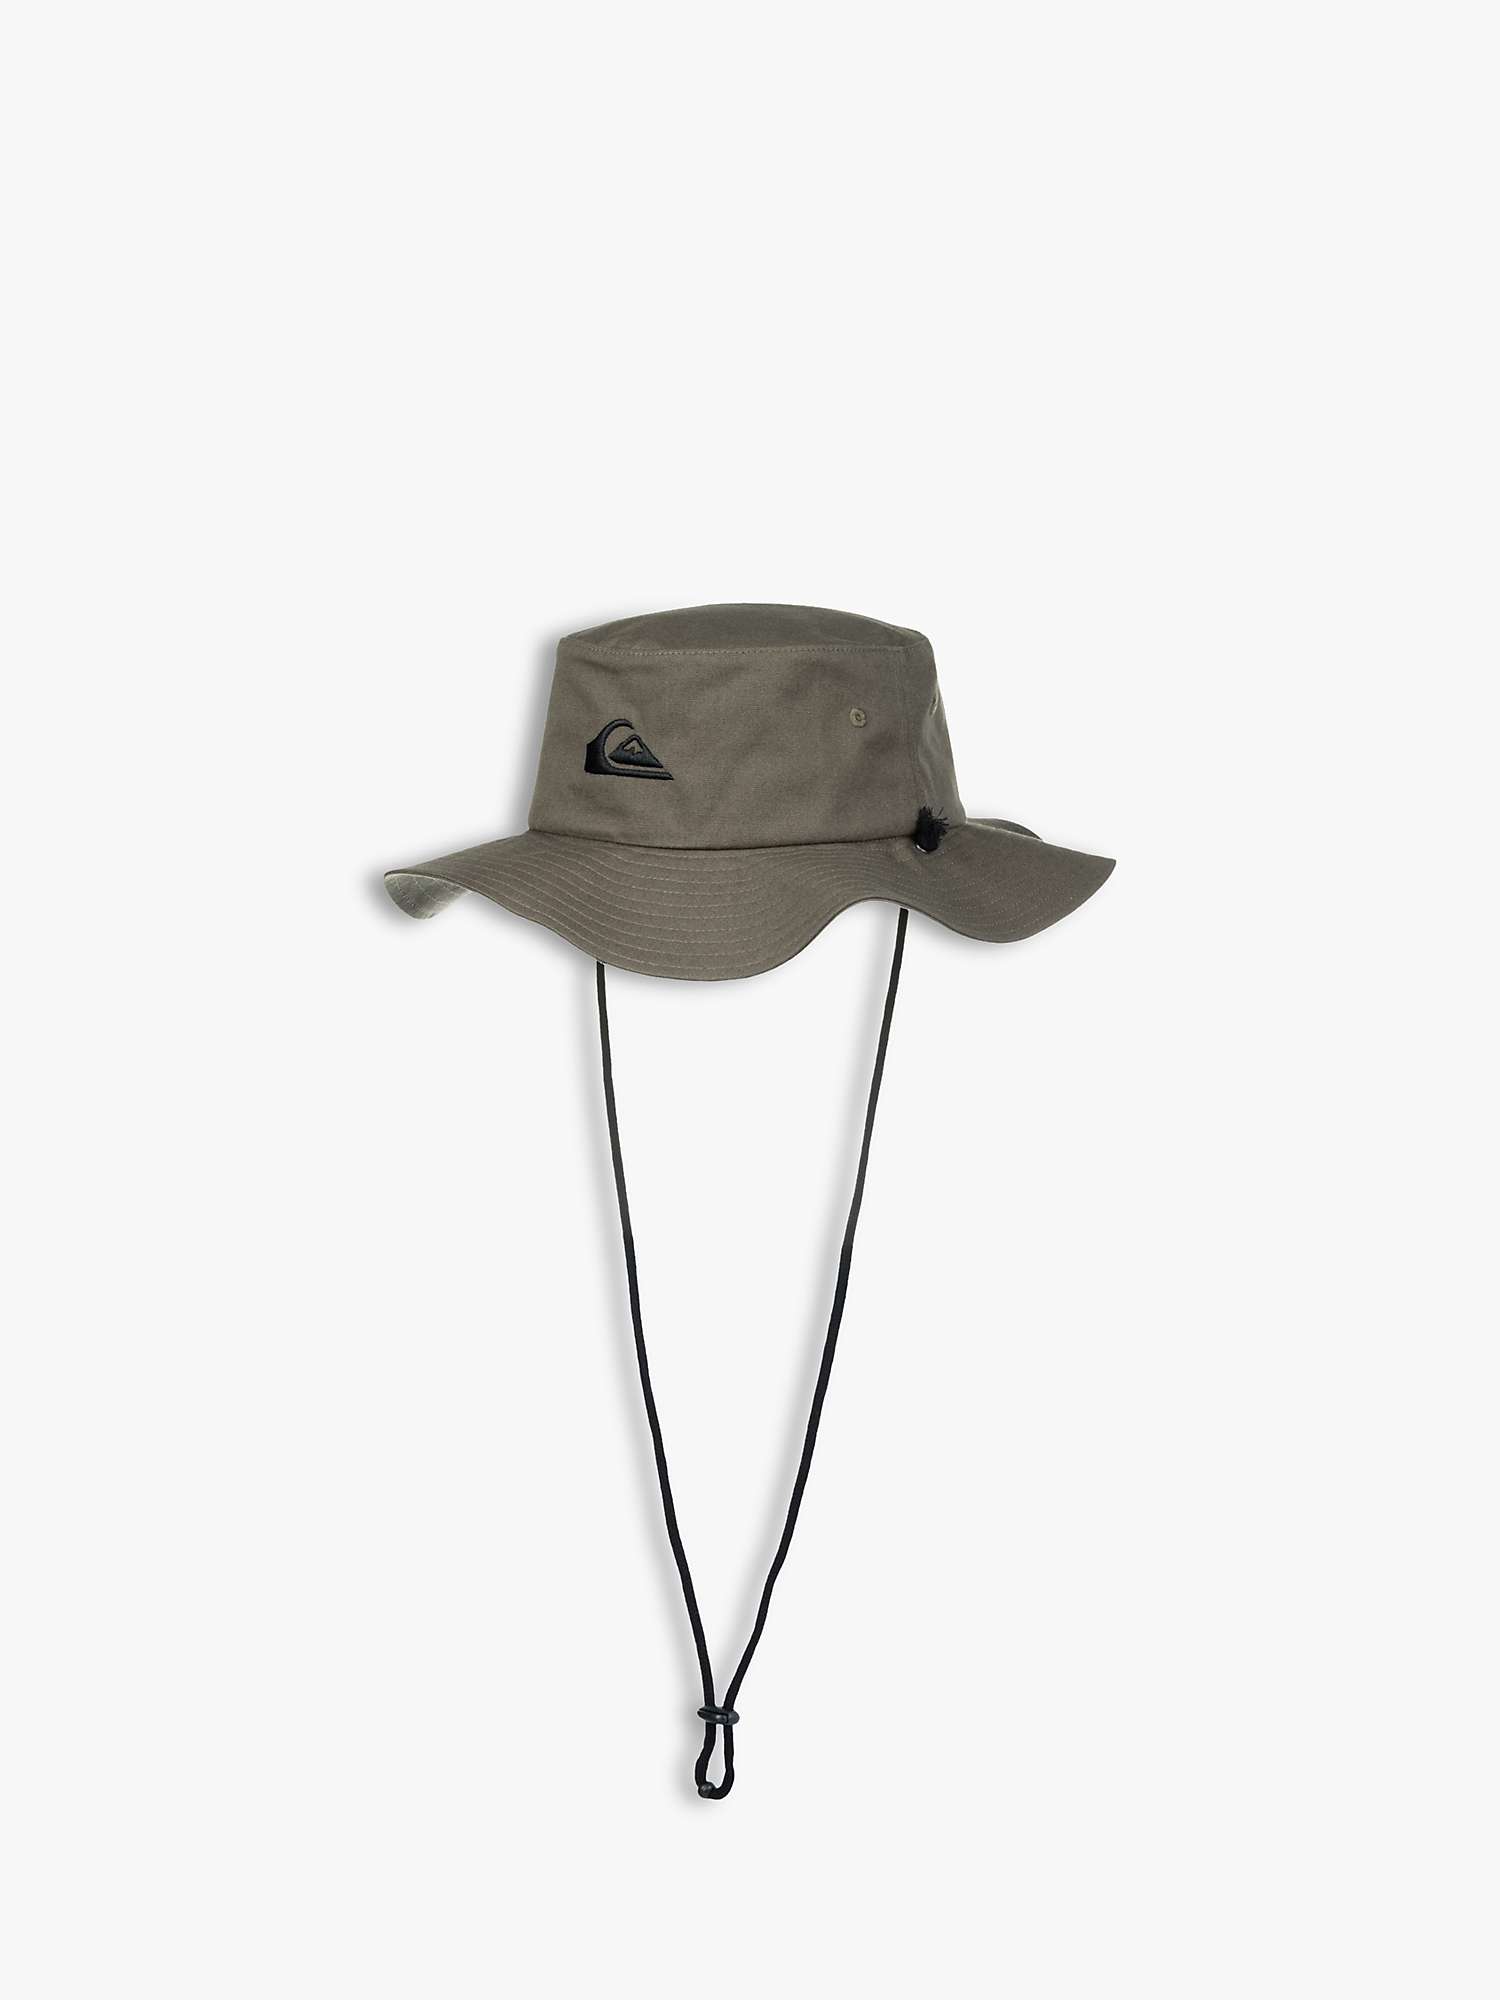 Buy Quiksilver Safari Boonie Cotton Twill Hat, Thyme Online at johnlewis.com